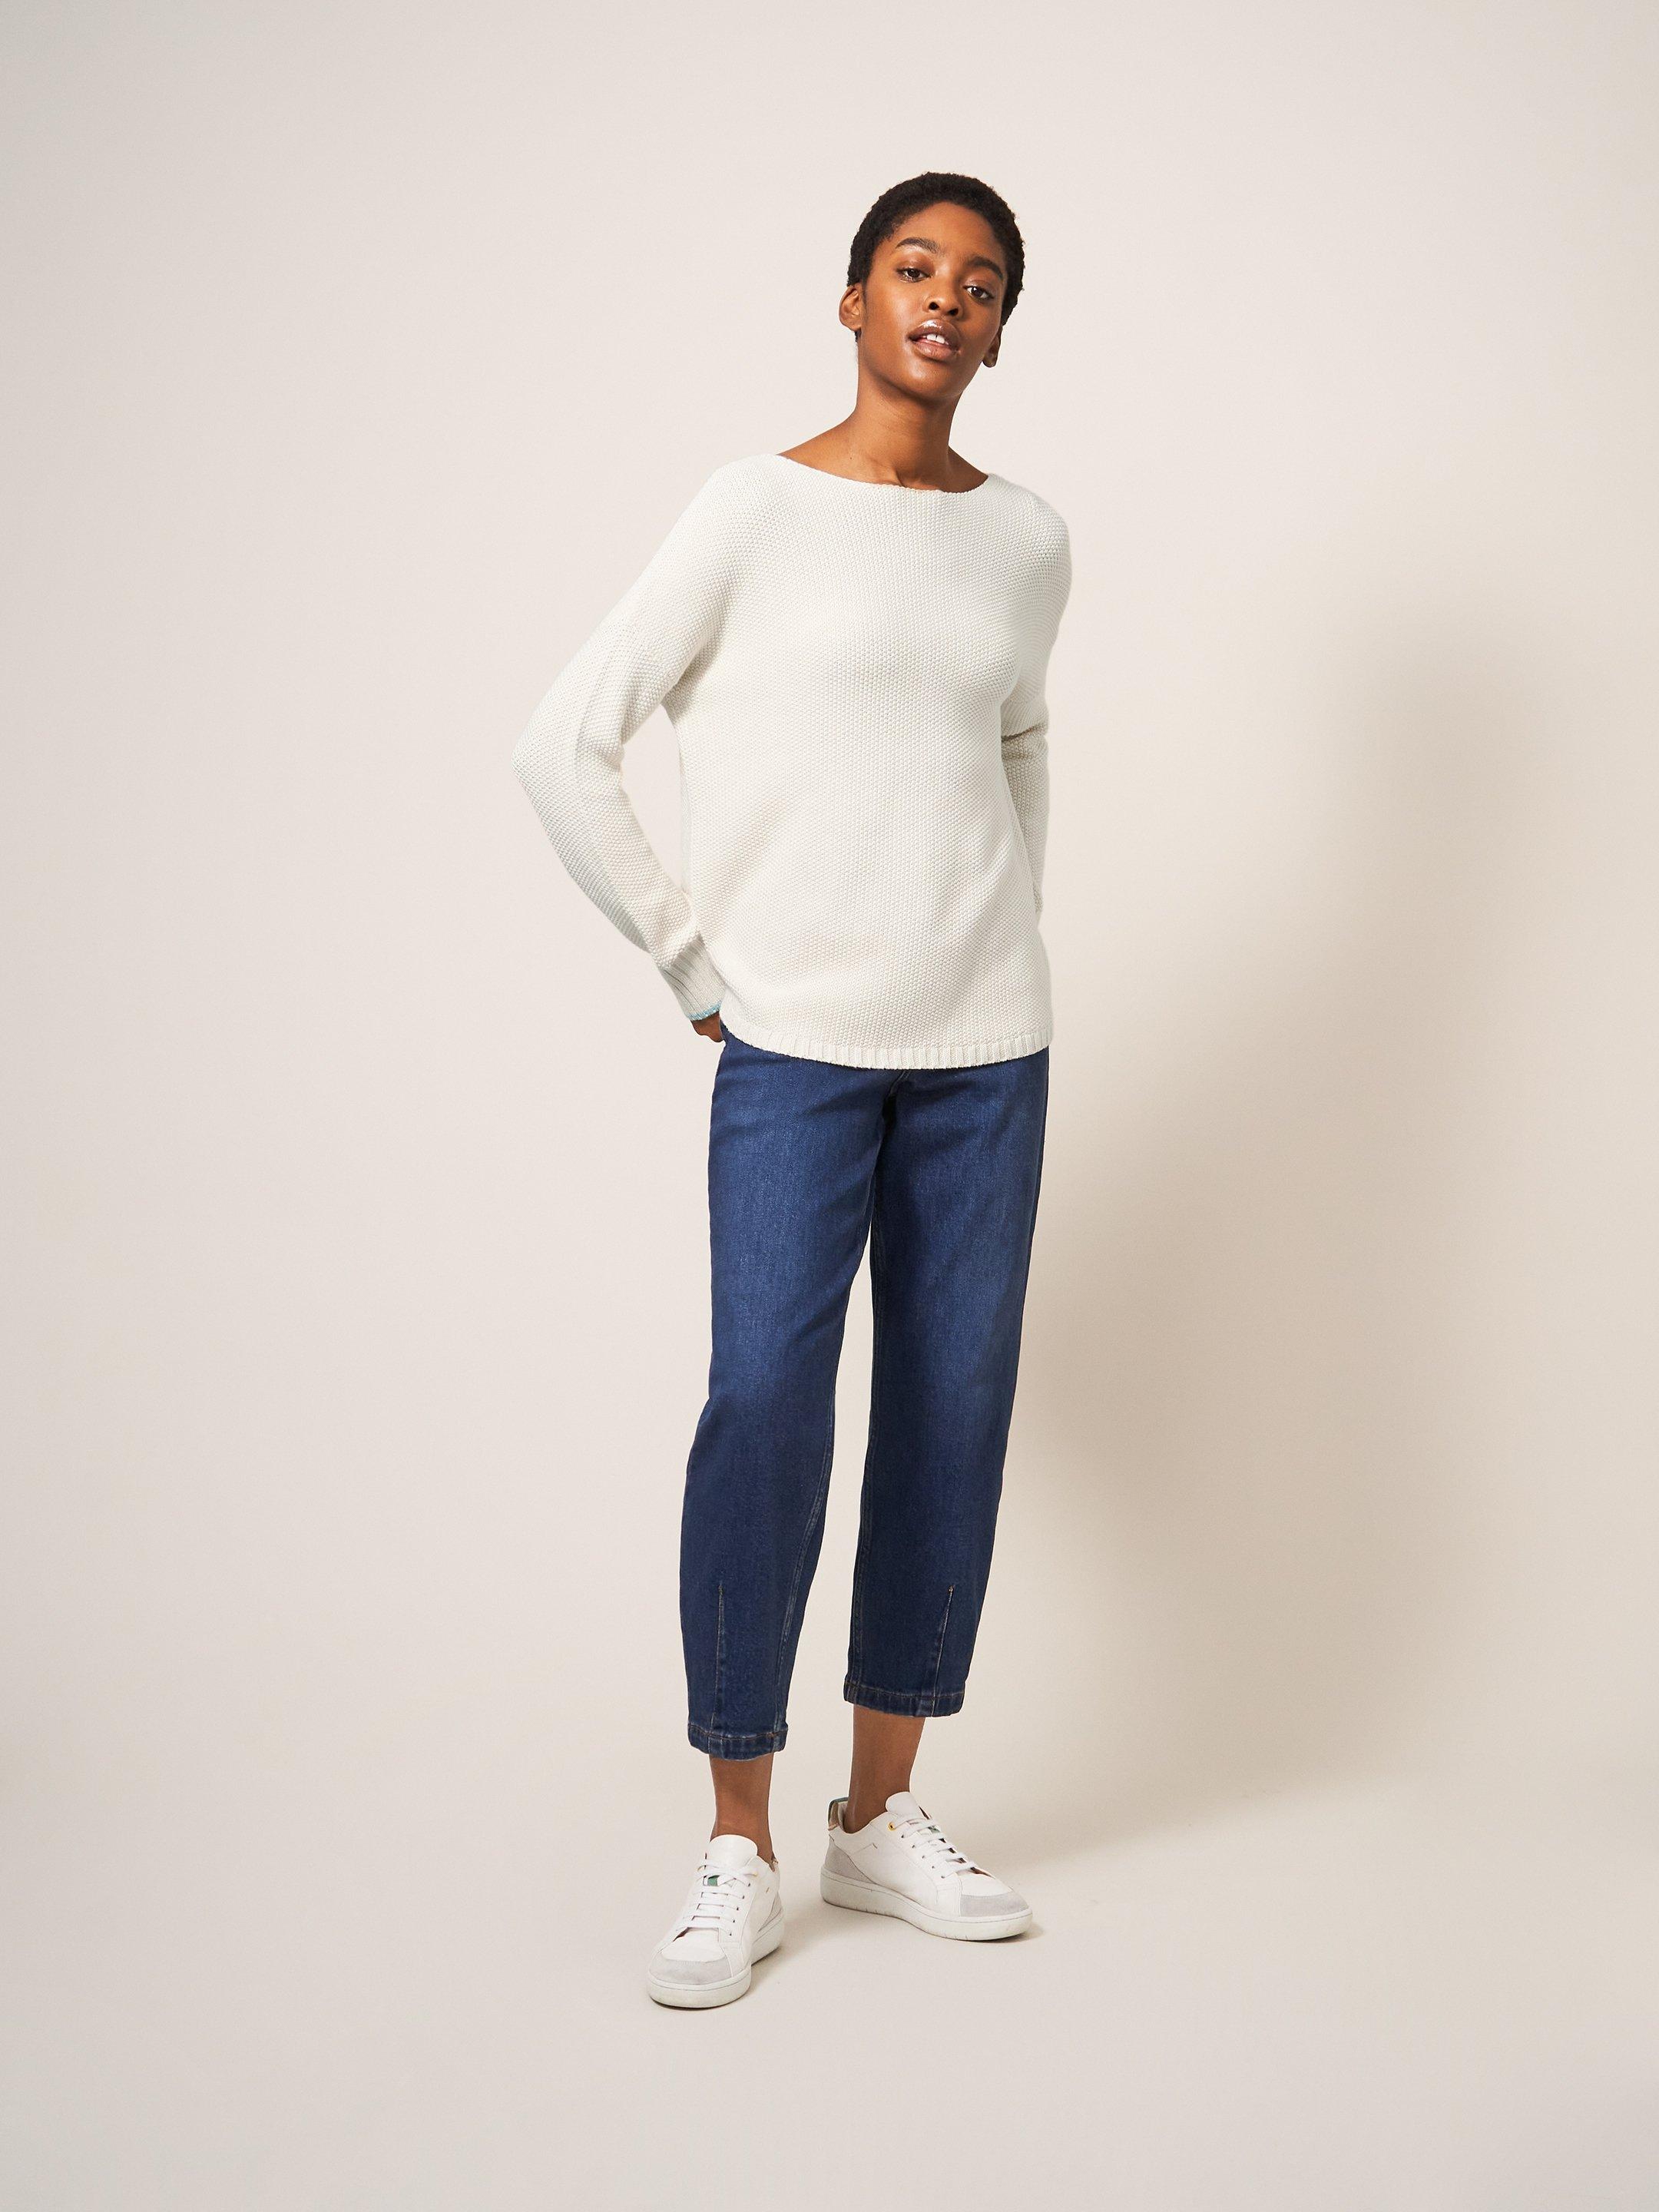 Southbank Knitted Jumper in PALE IVORY - MODEL FRONT